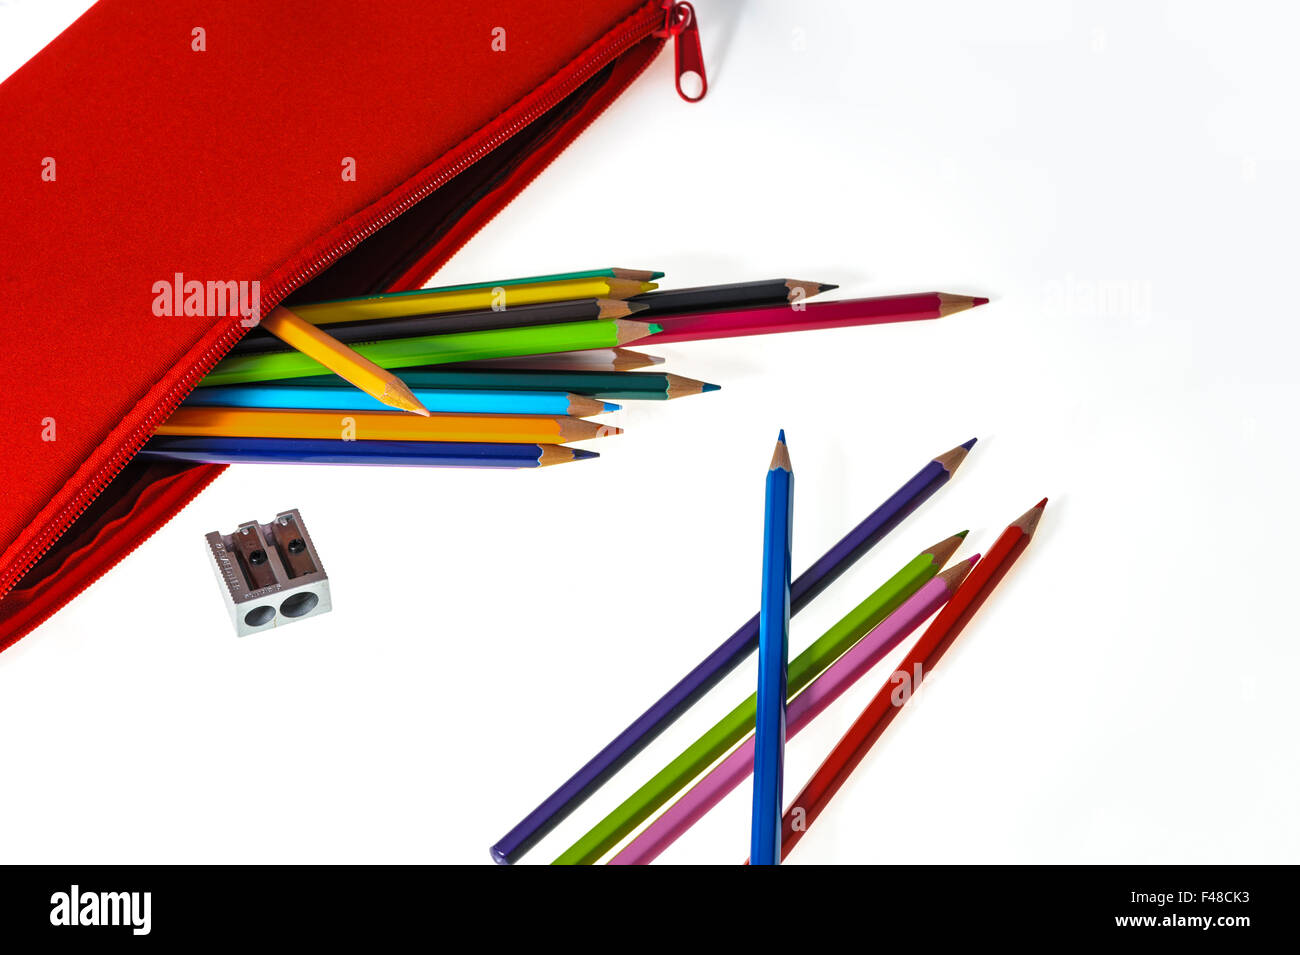 Red pencil case with coloured pencils and sharpener. Stock Photo